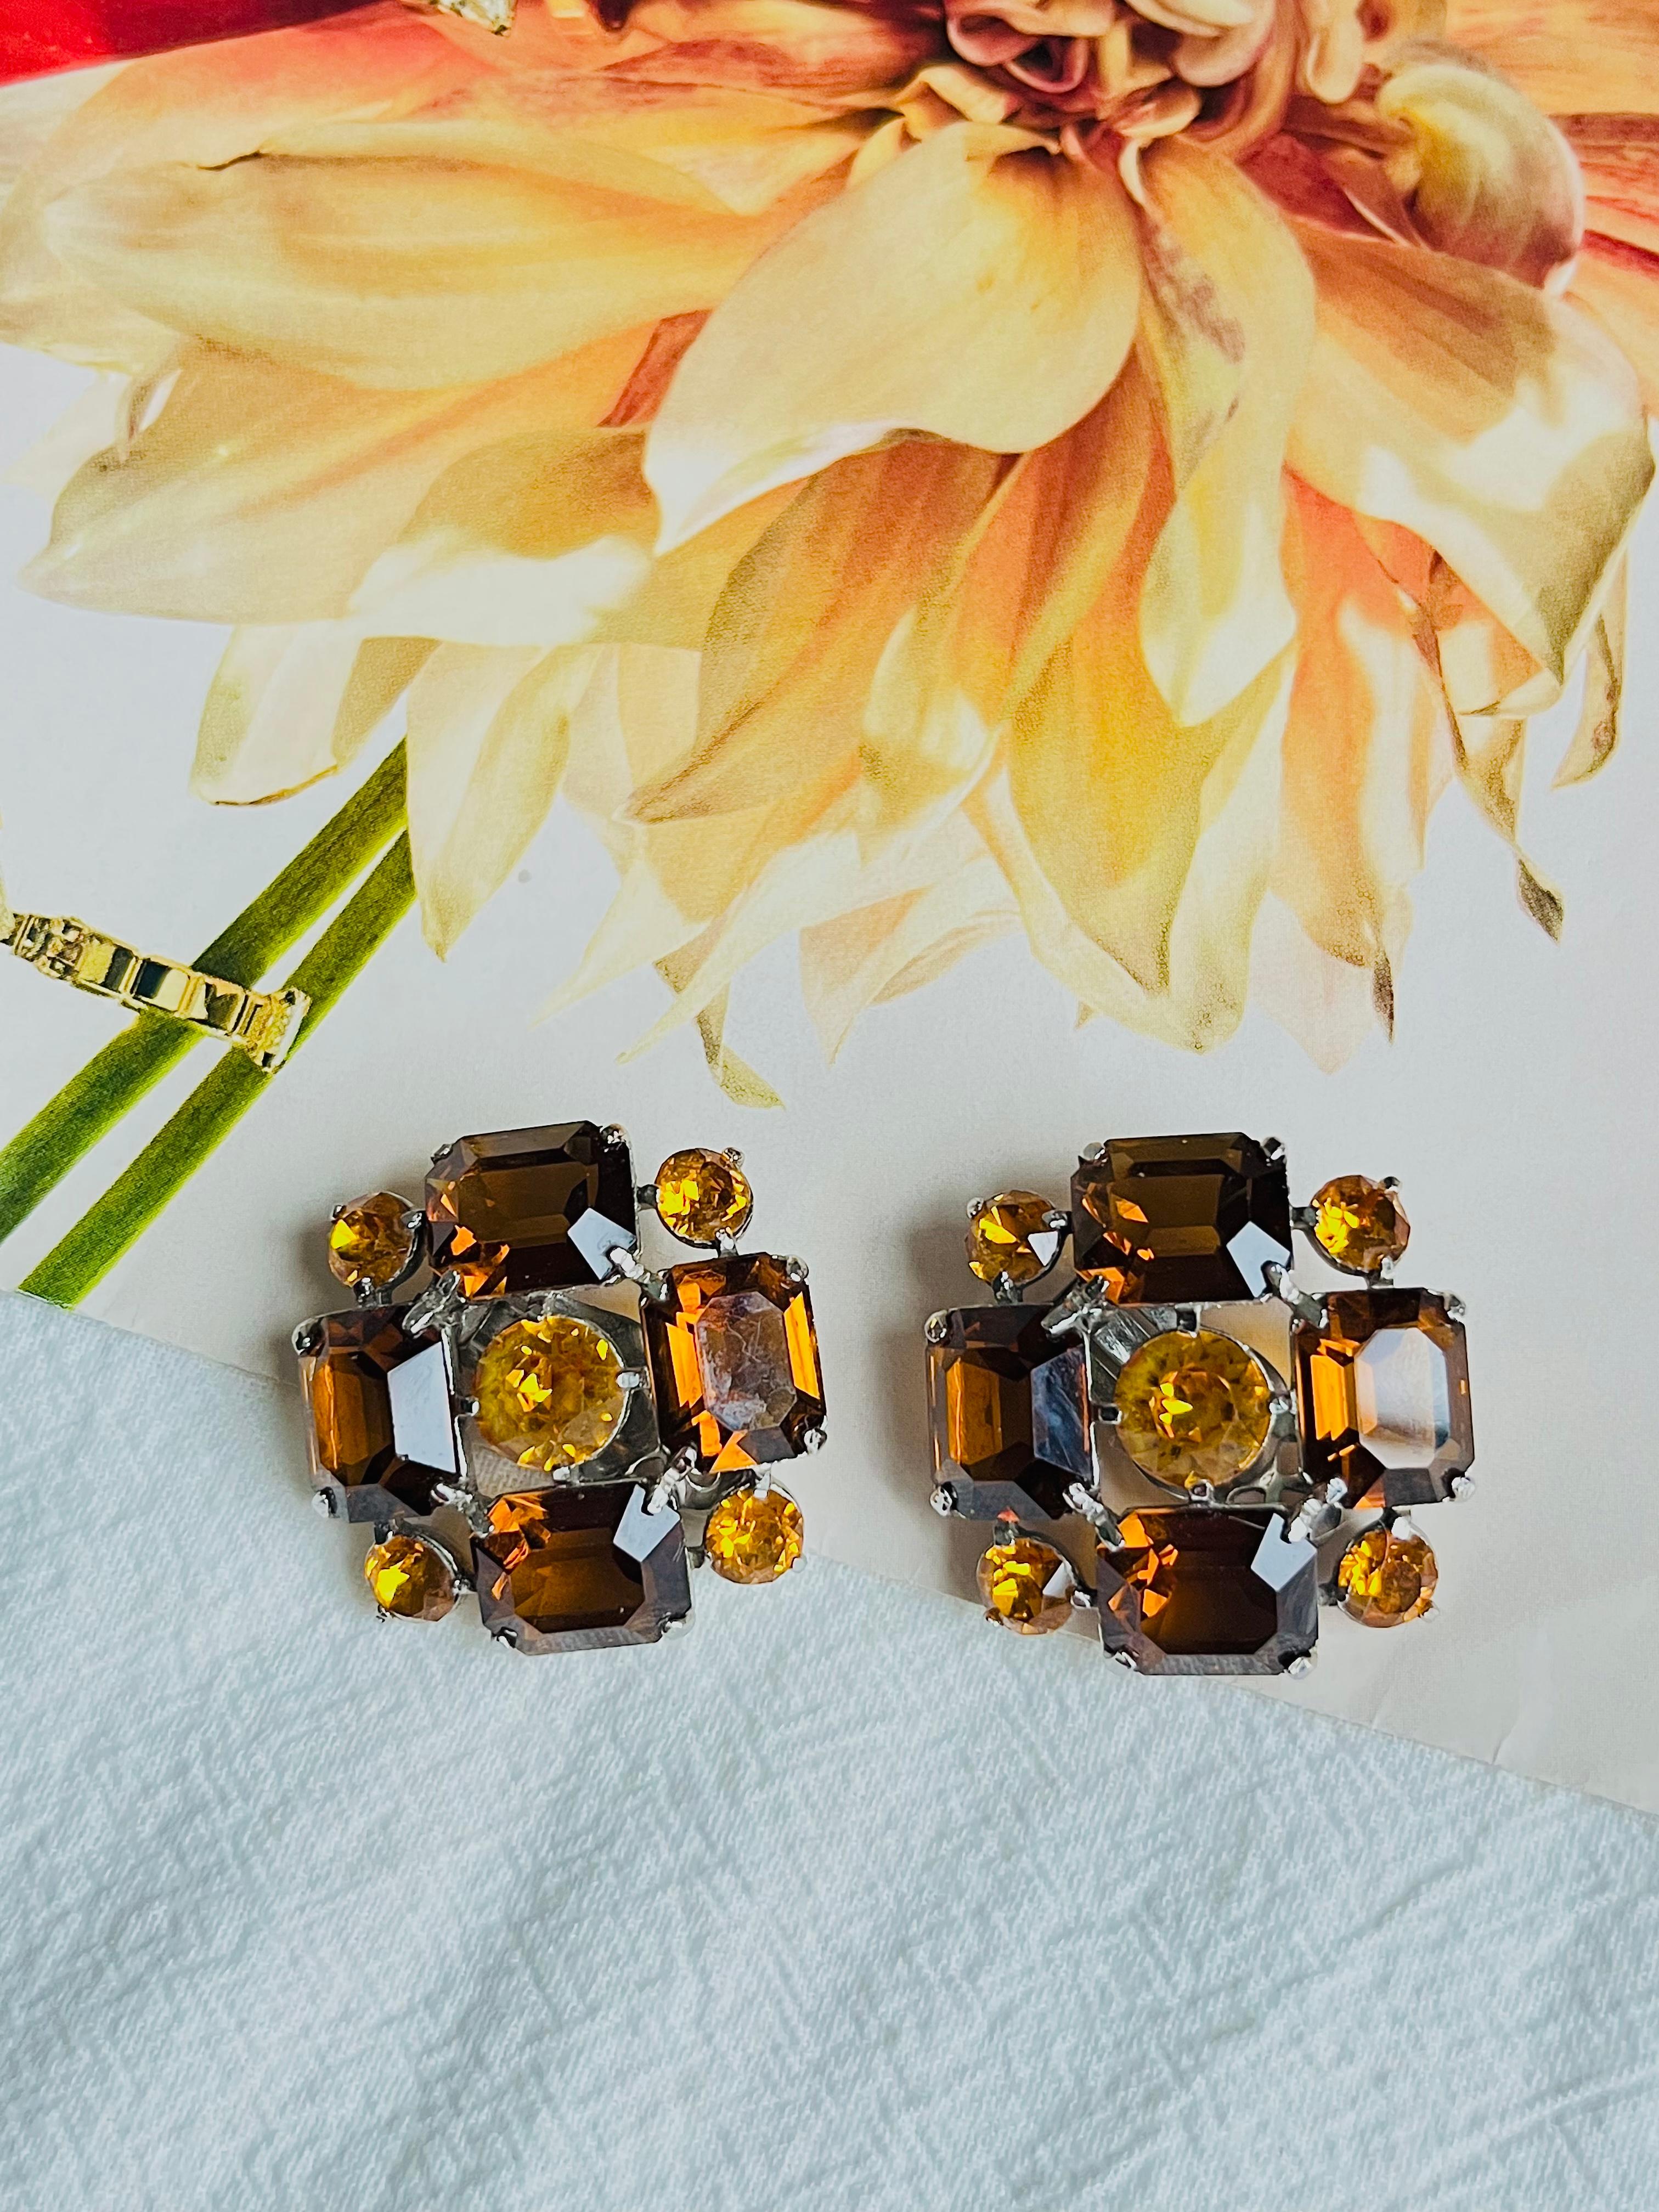 Christian Dior Mitchel Maer Citrine Amber Flower Crystals Silver Clip Earrings  In Excellent Condition For Sale In Wokingham, England